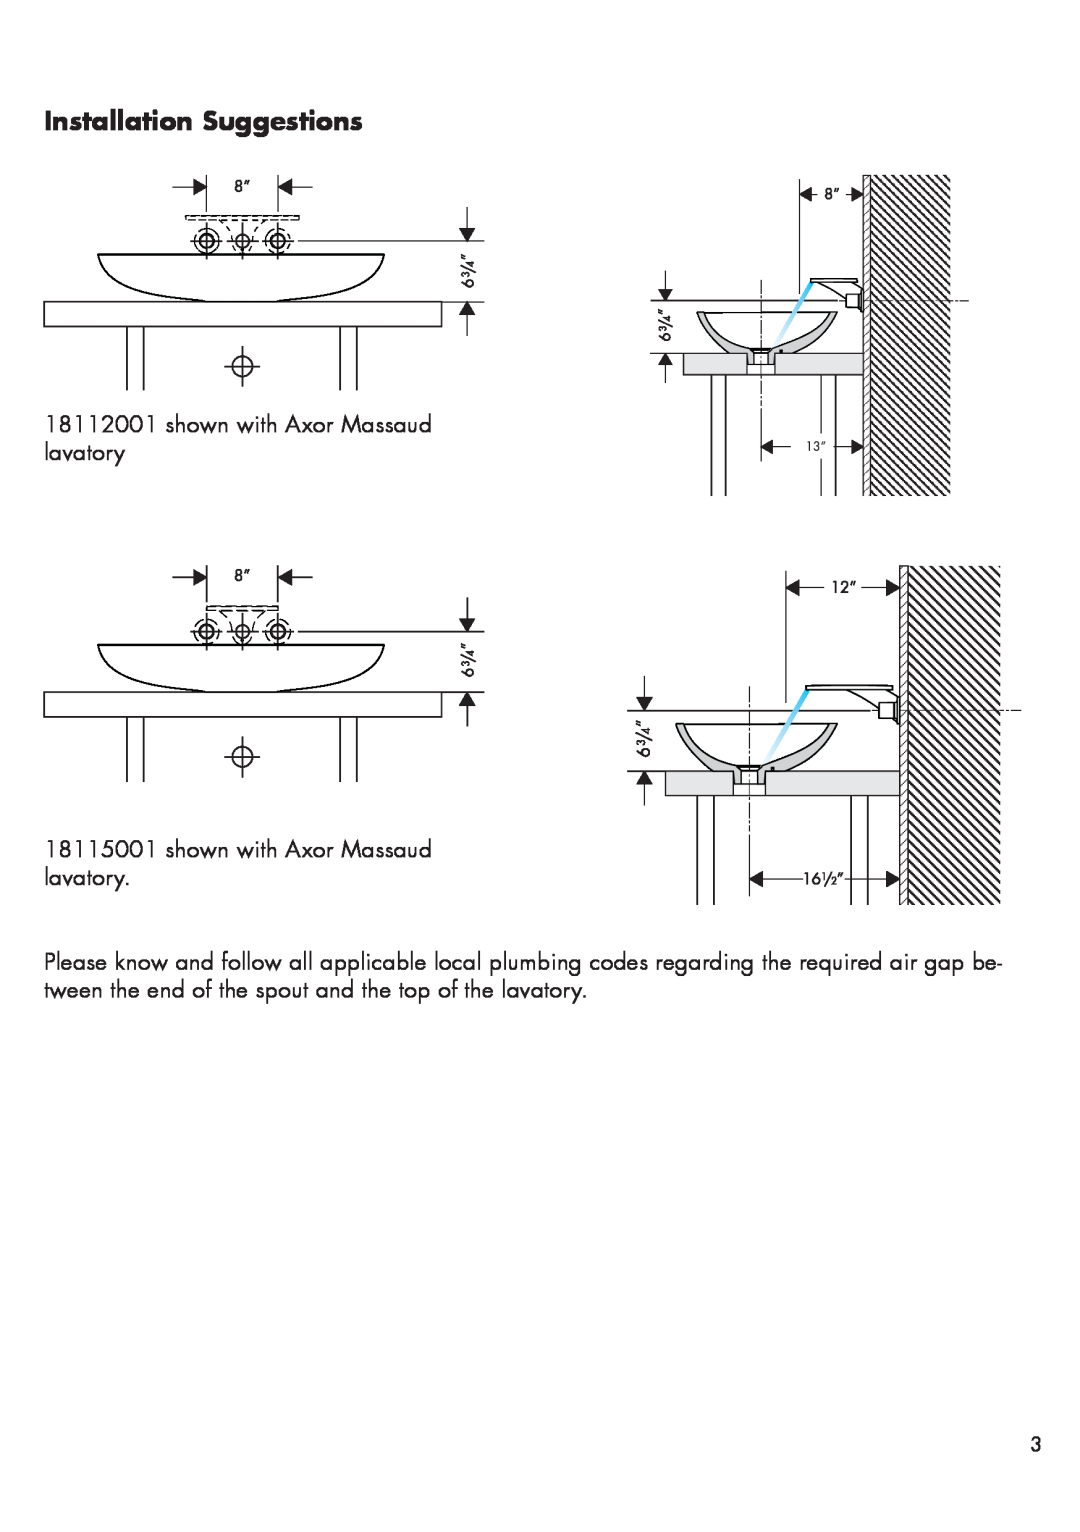 Axor 18113181 installation instructions Installation Suggestions, shown with Axor Massaud lavatory 